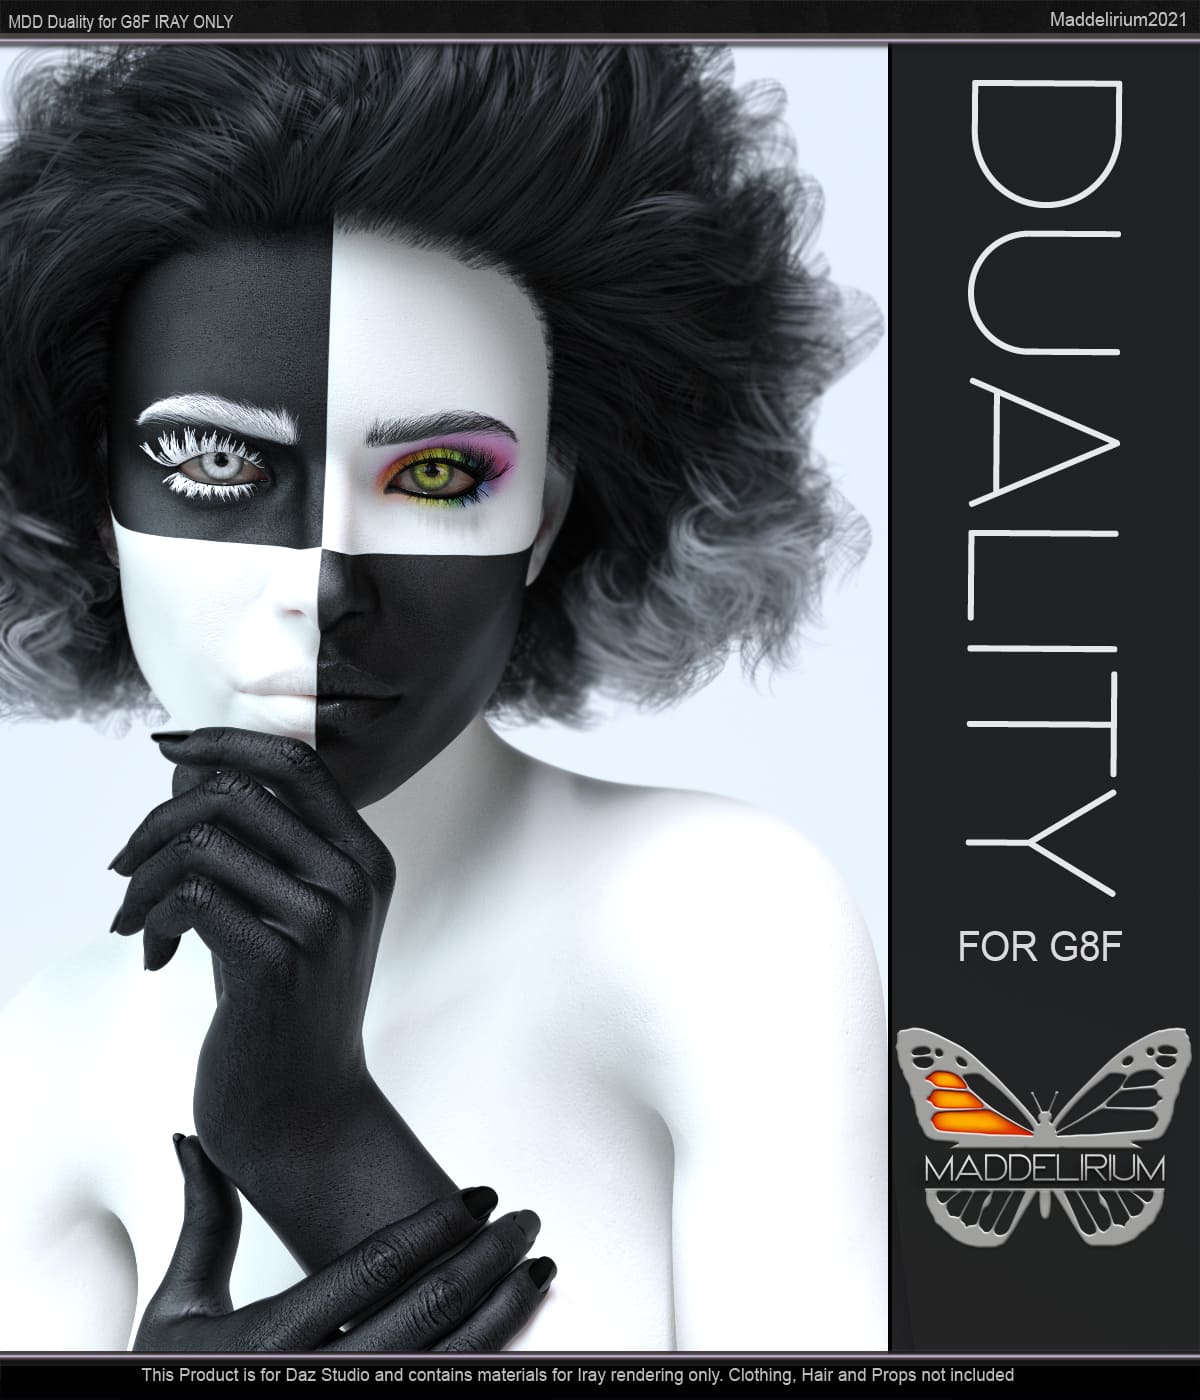 MDD Duality for G8F IRAY ONLY_DAZ3D下载站